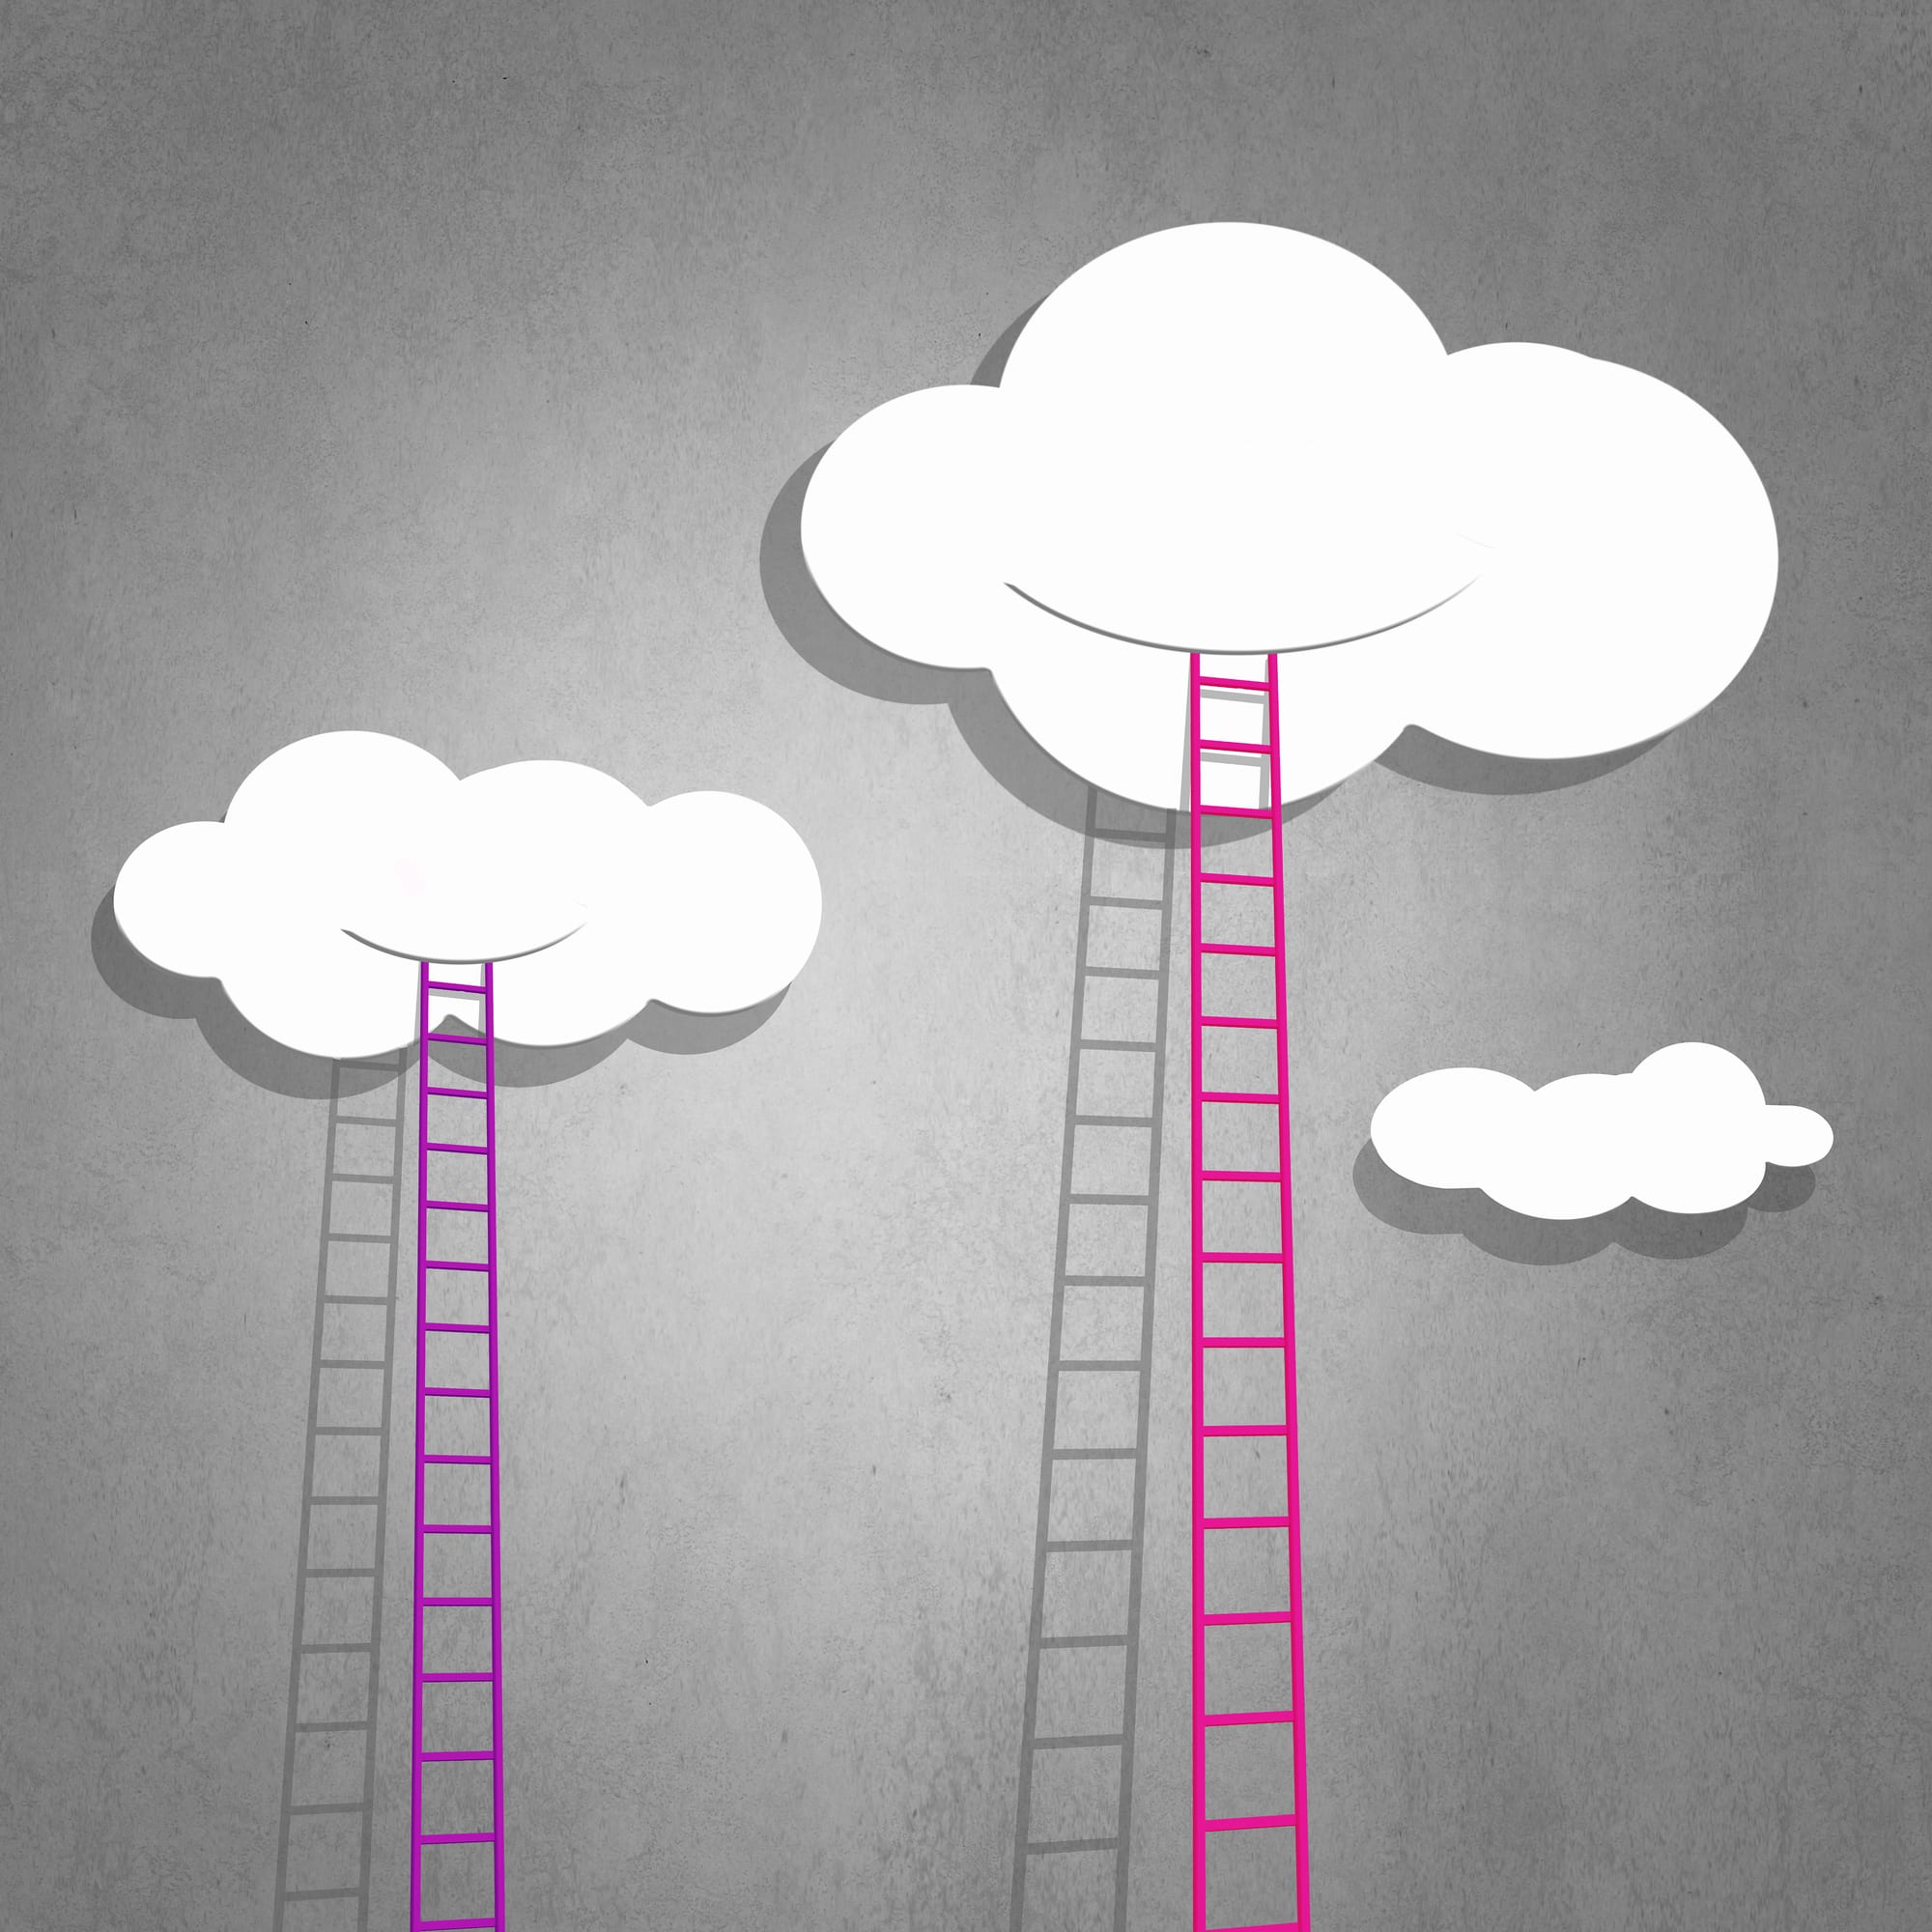 Ladders reaching up into the Cloud, symbolizing improving cloud computing performance.